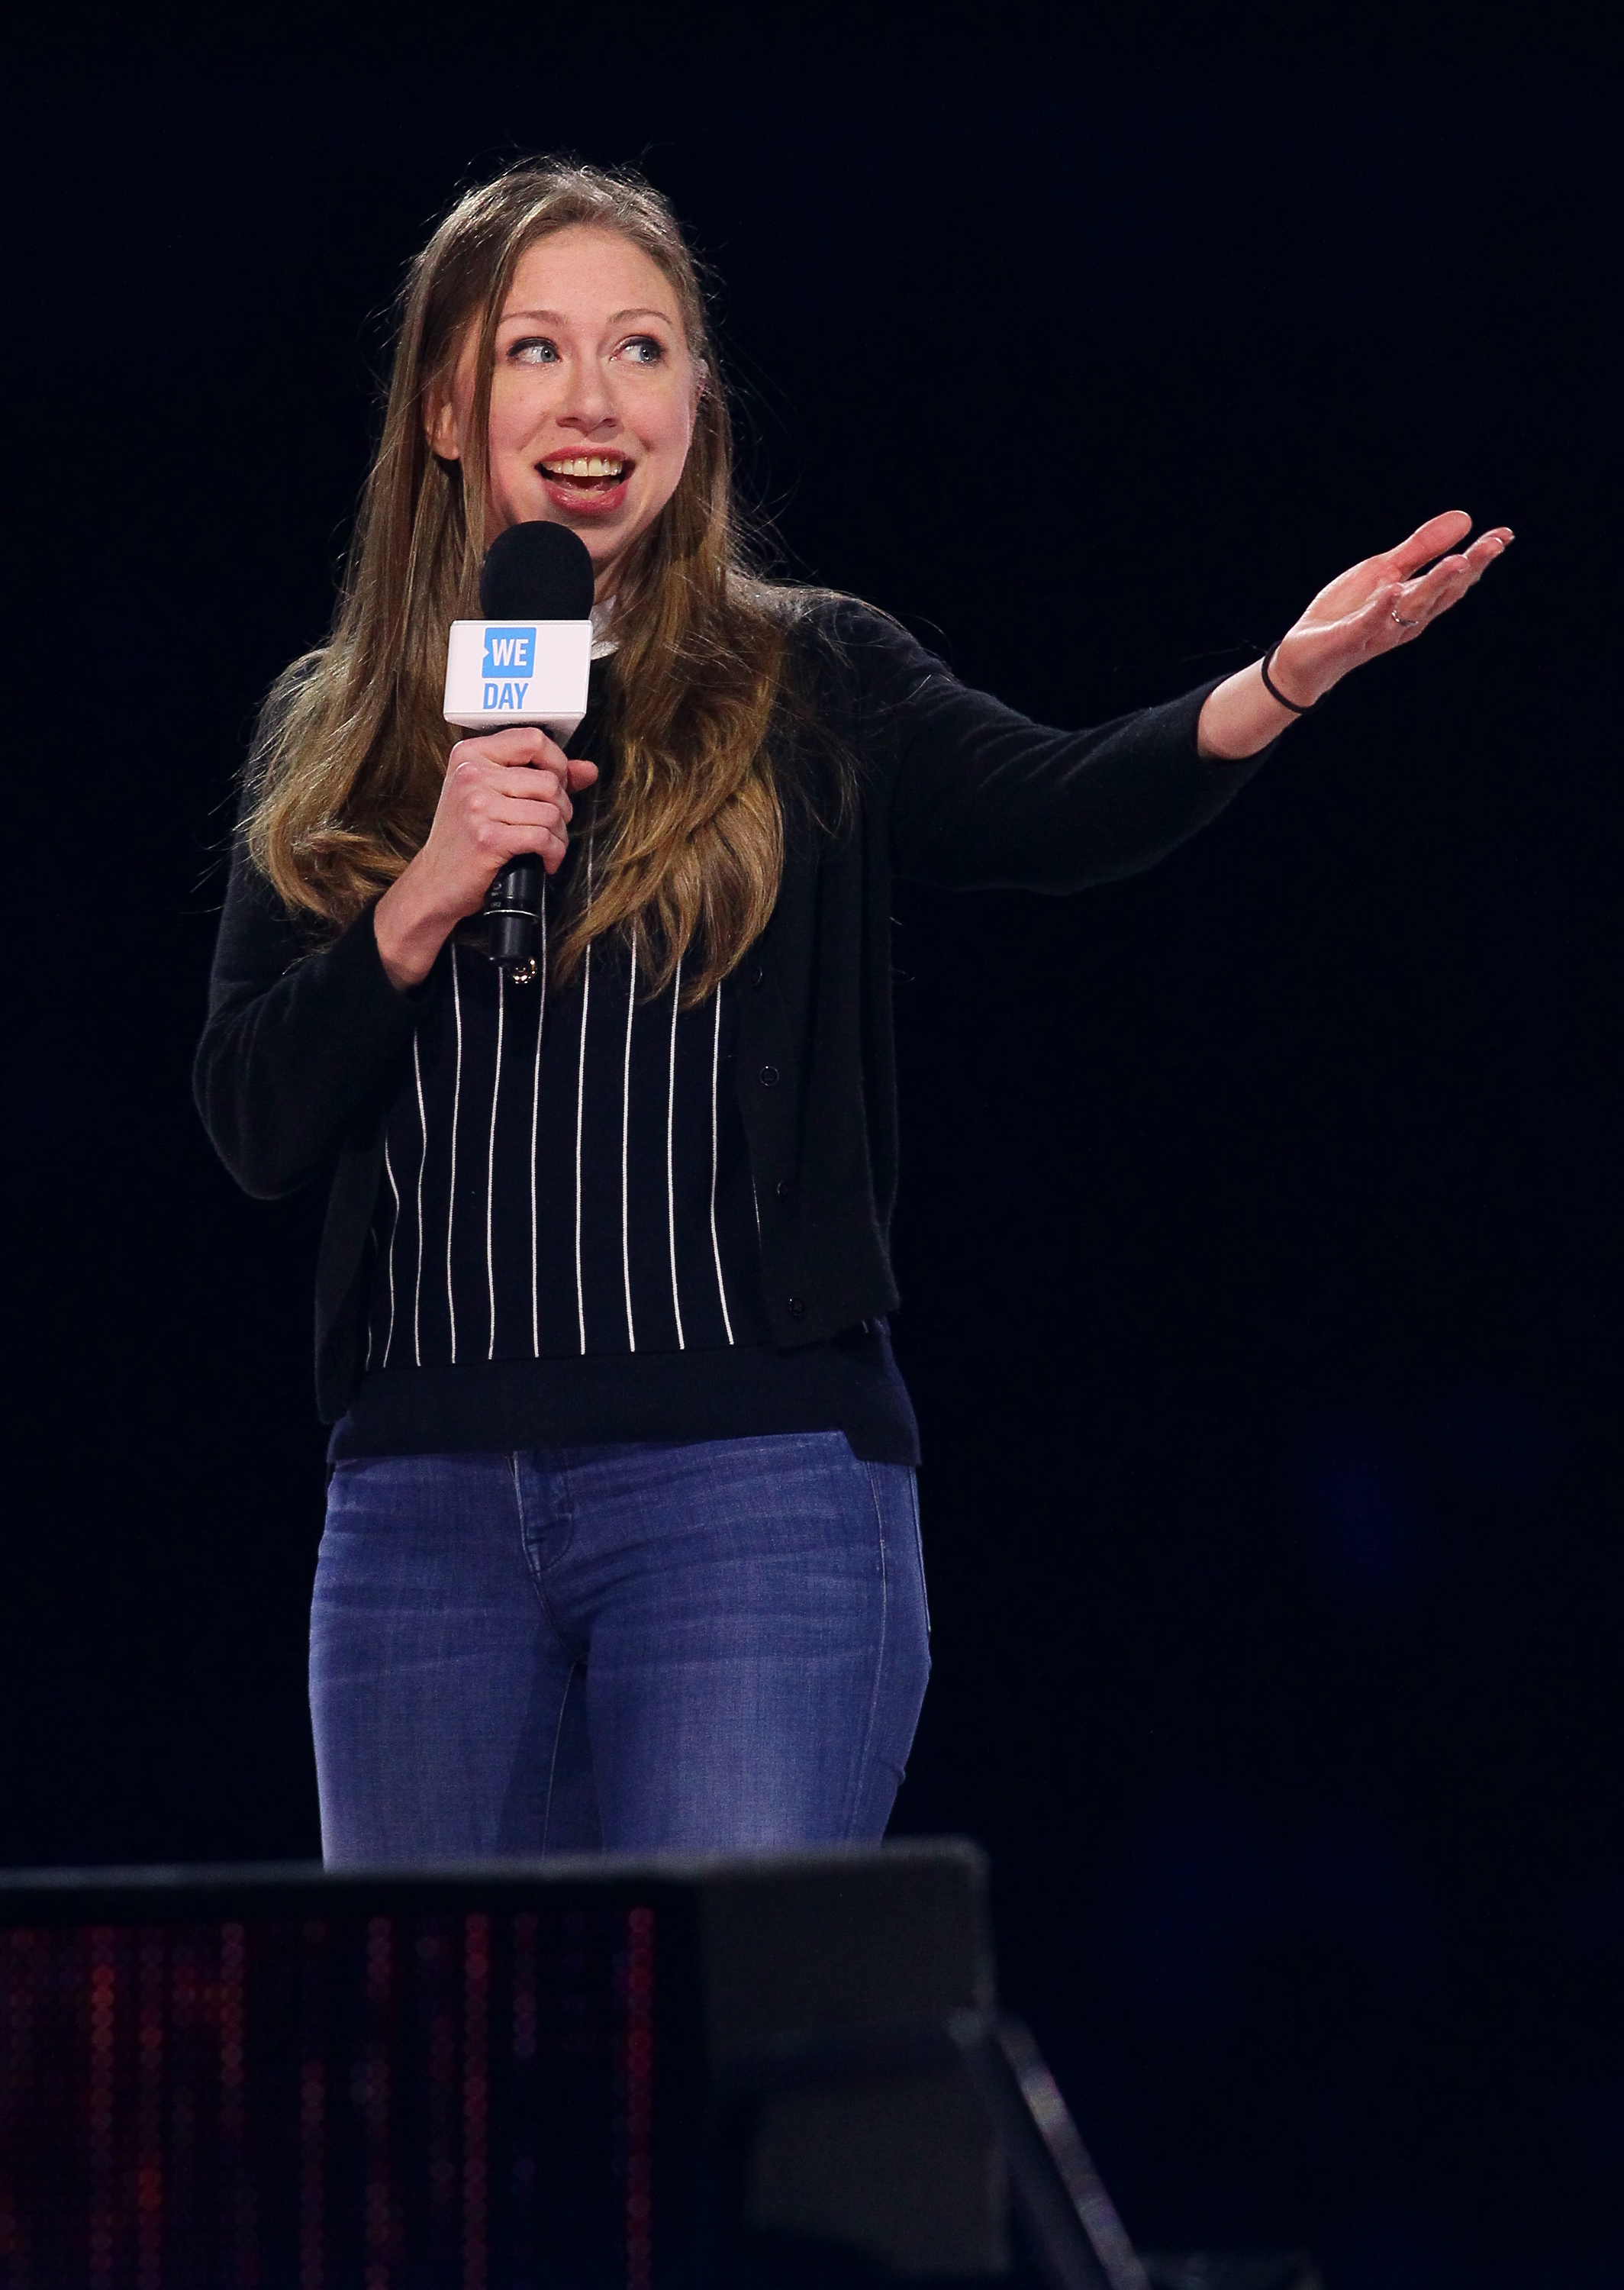 Ciara, Darren Criss, Chelsea Clinton, Lily Collins, Rowan Blanchard, Nico & Vinz, Natalie La Rose And More Come Together At WE Day Minnesota to Celebrate The Power Young People Have To Change The World